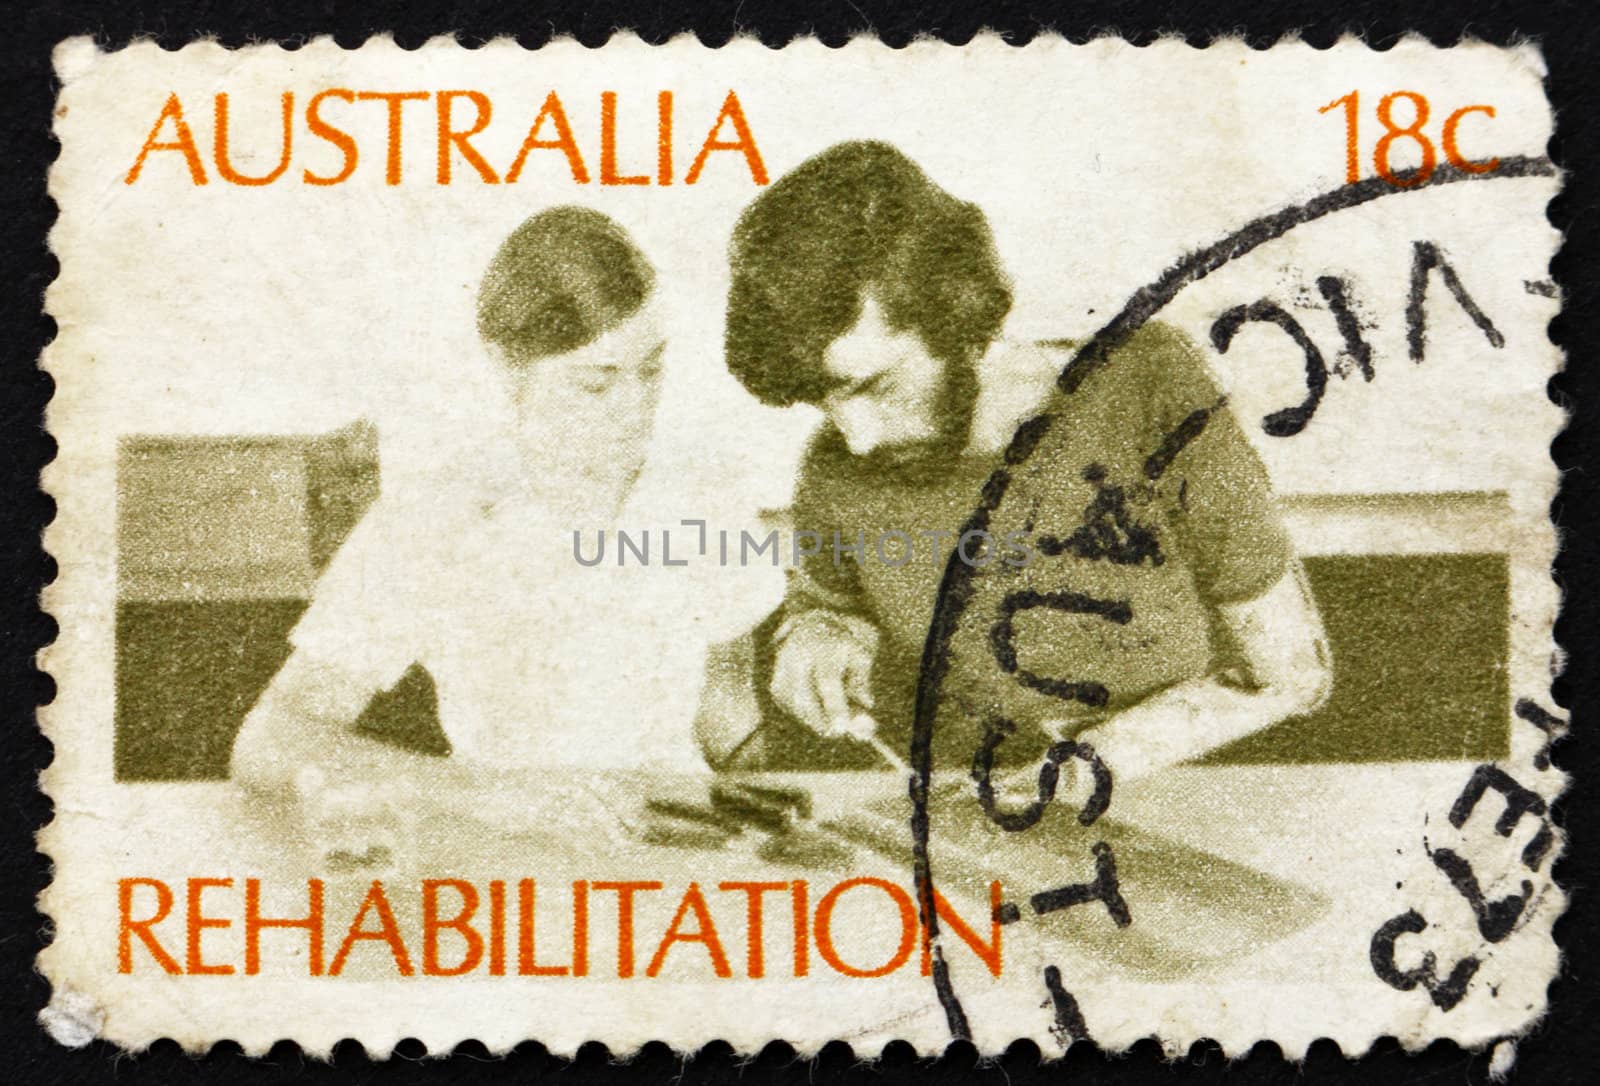 AUSTRALIA - CIRCA 1972: a stamp printed in the Australia shows Amputee Assembling Electrical Circuit, Rehabilitation of the Handicapped, circa 1972